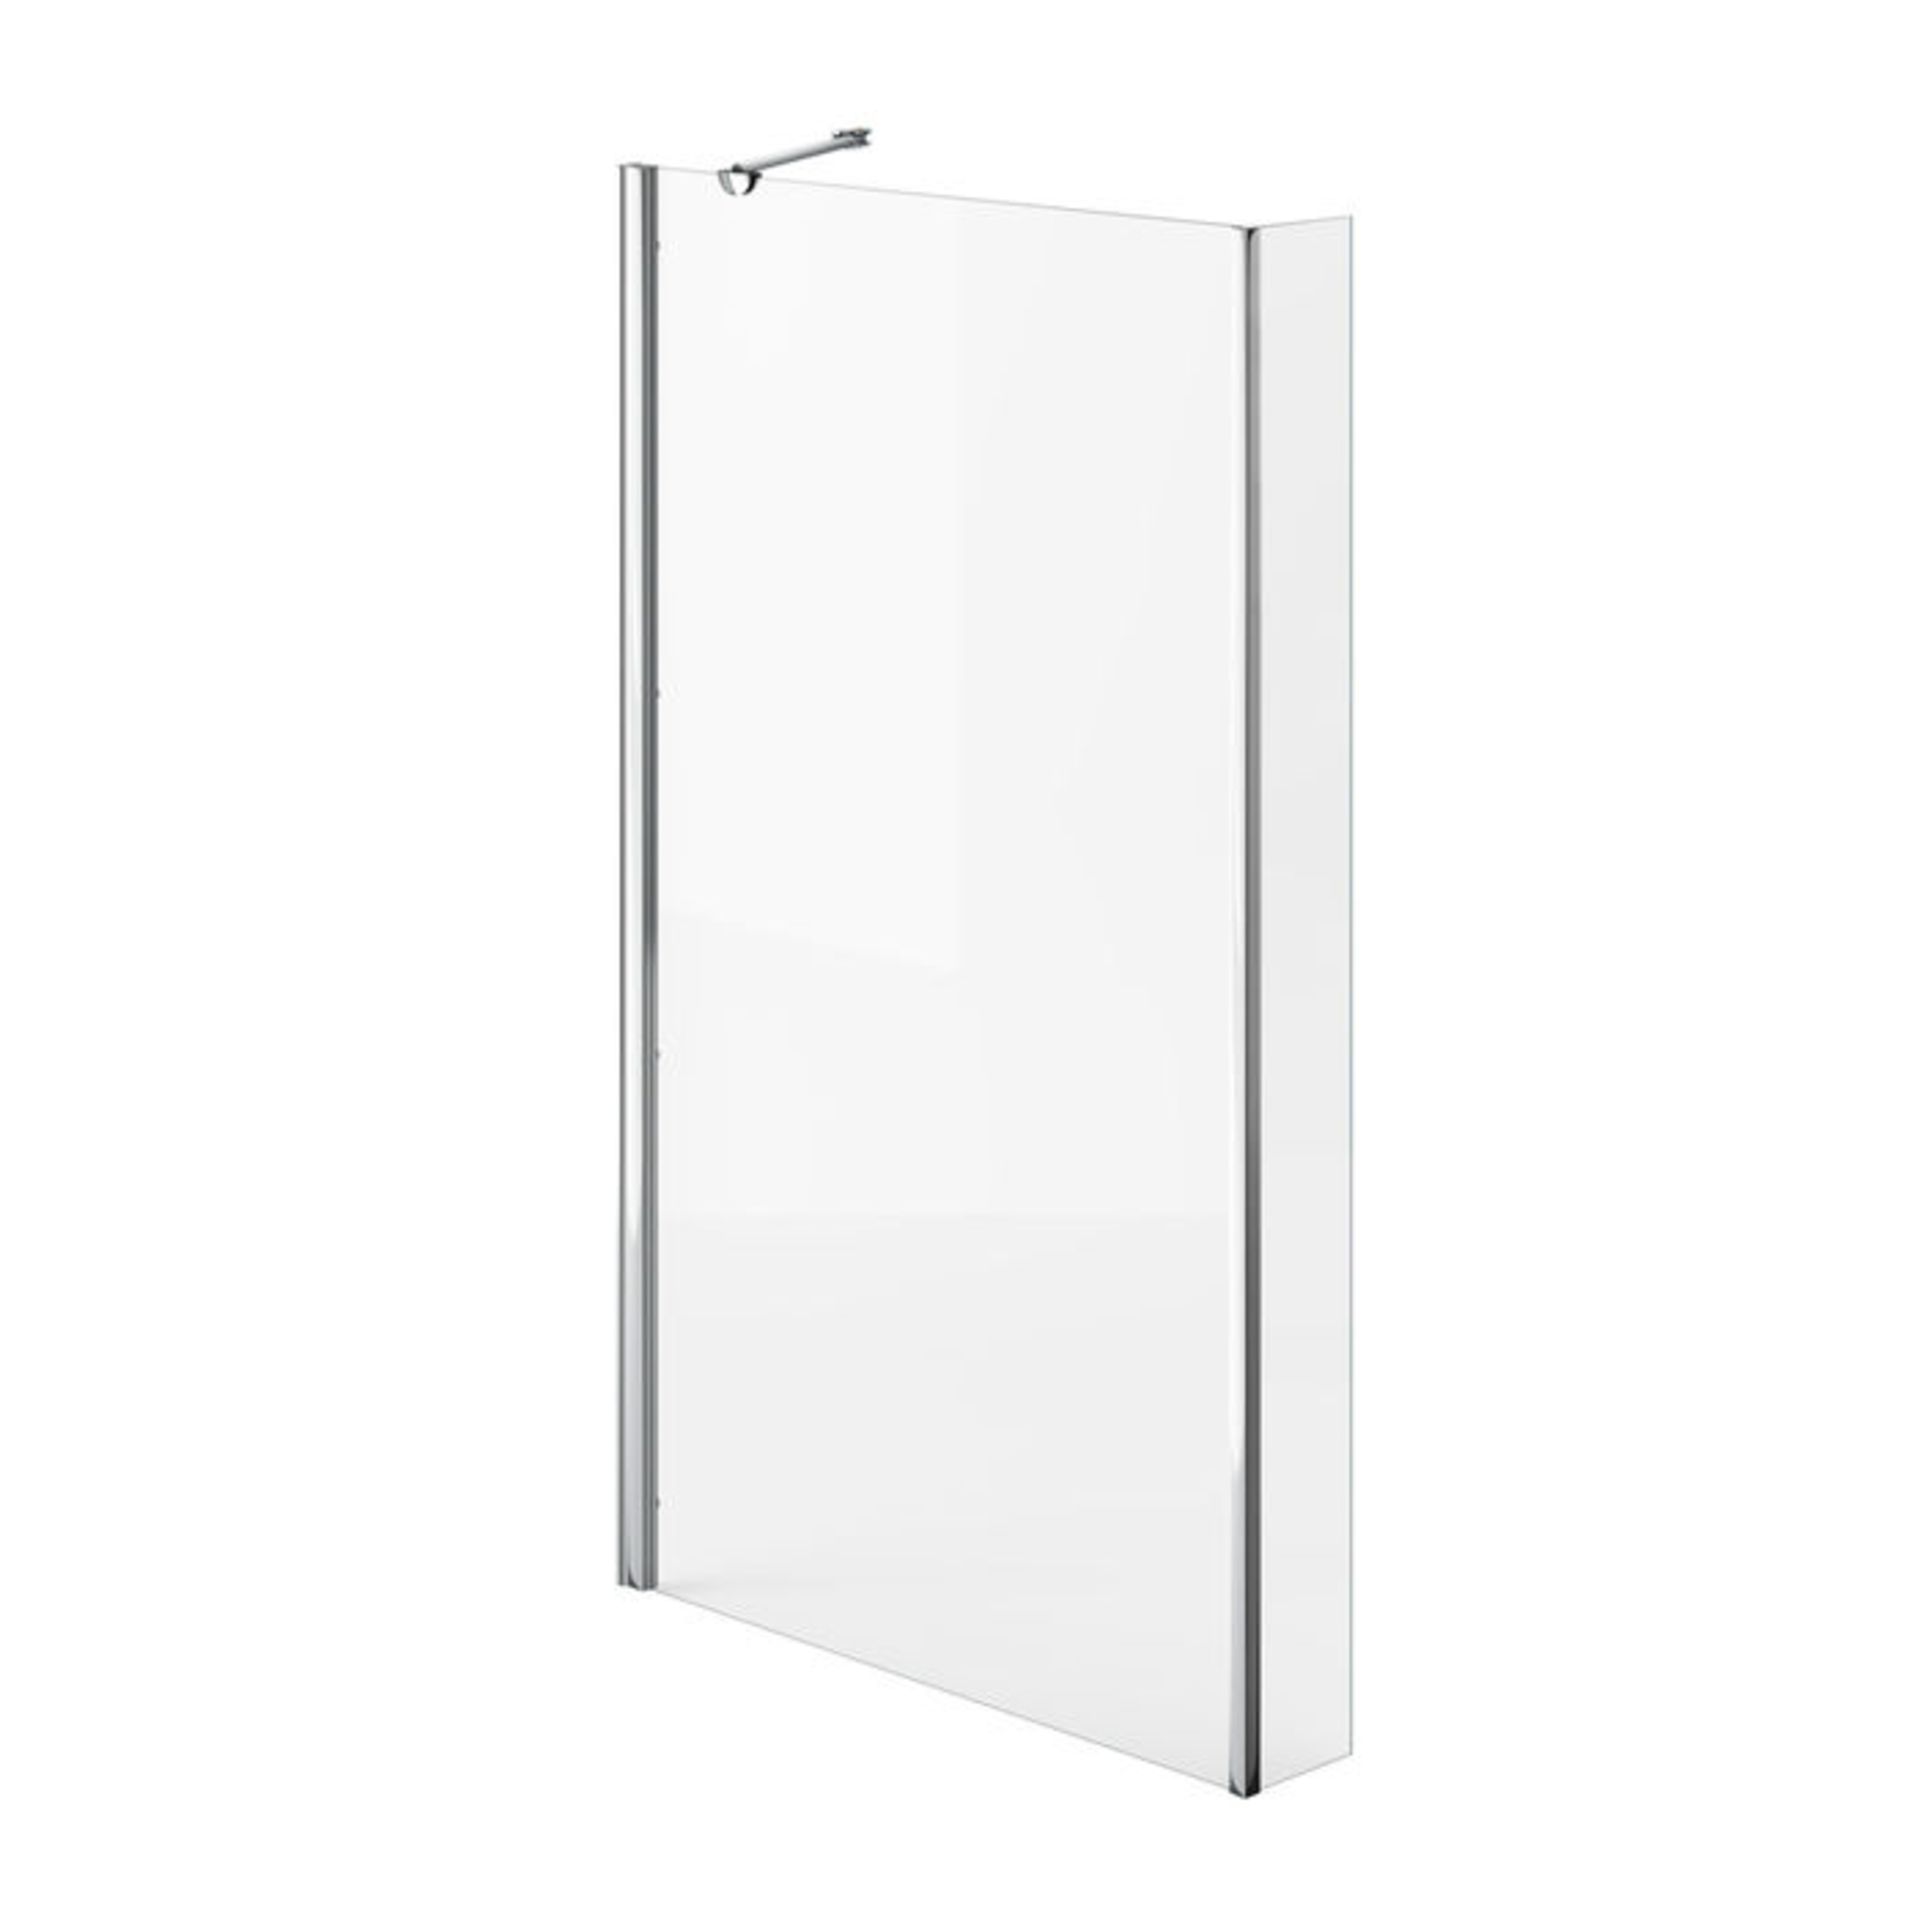 (SP63) 805mm - 4mm - L Shape Bath Screen. 4mm Tempered Saftey Glass Screen comes complete with - Image 2 of 2